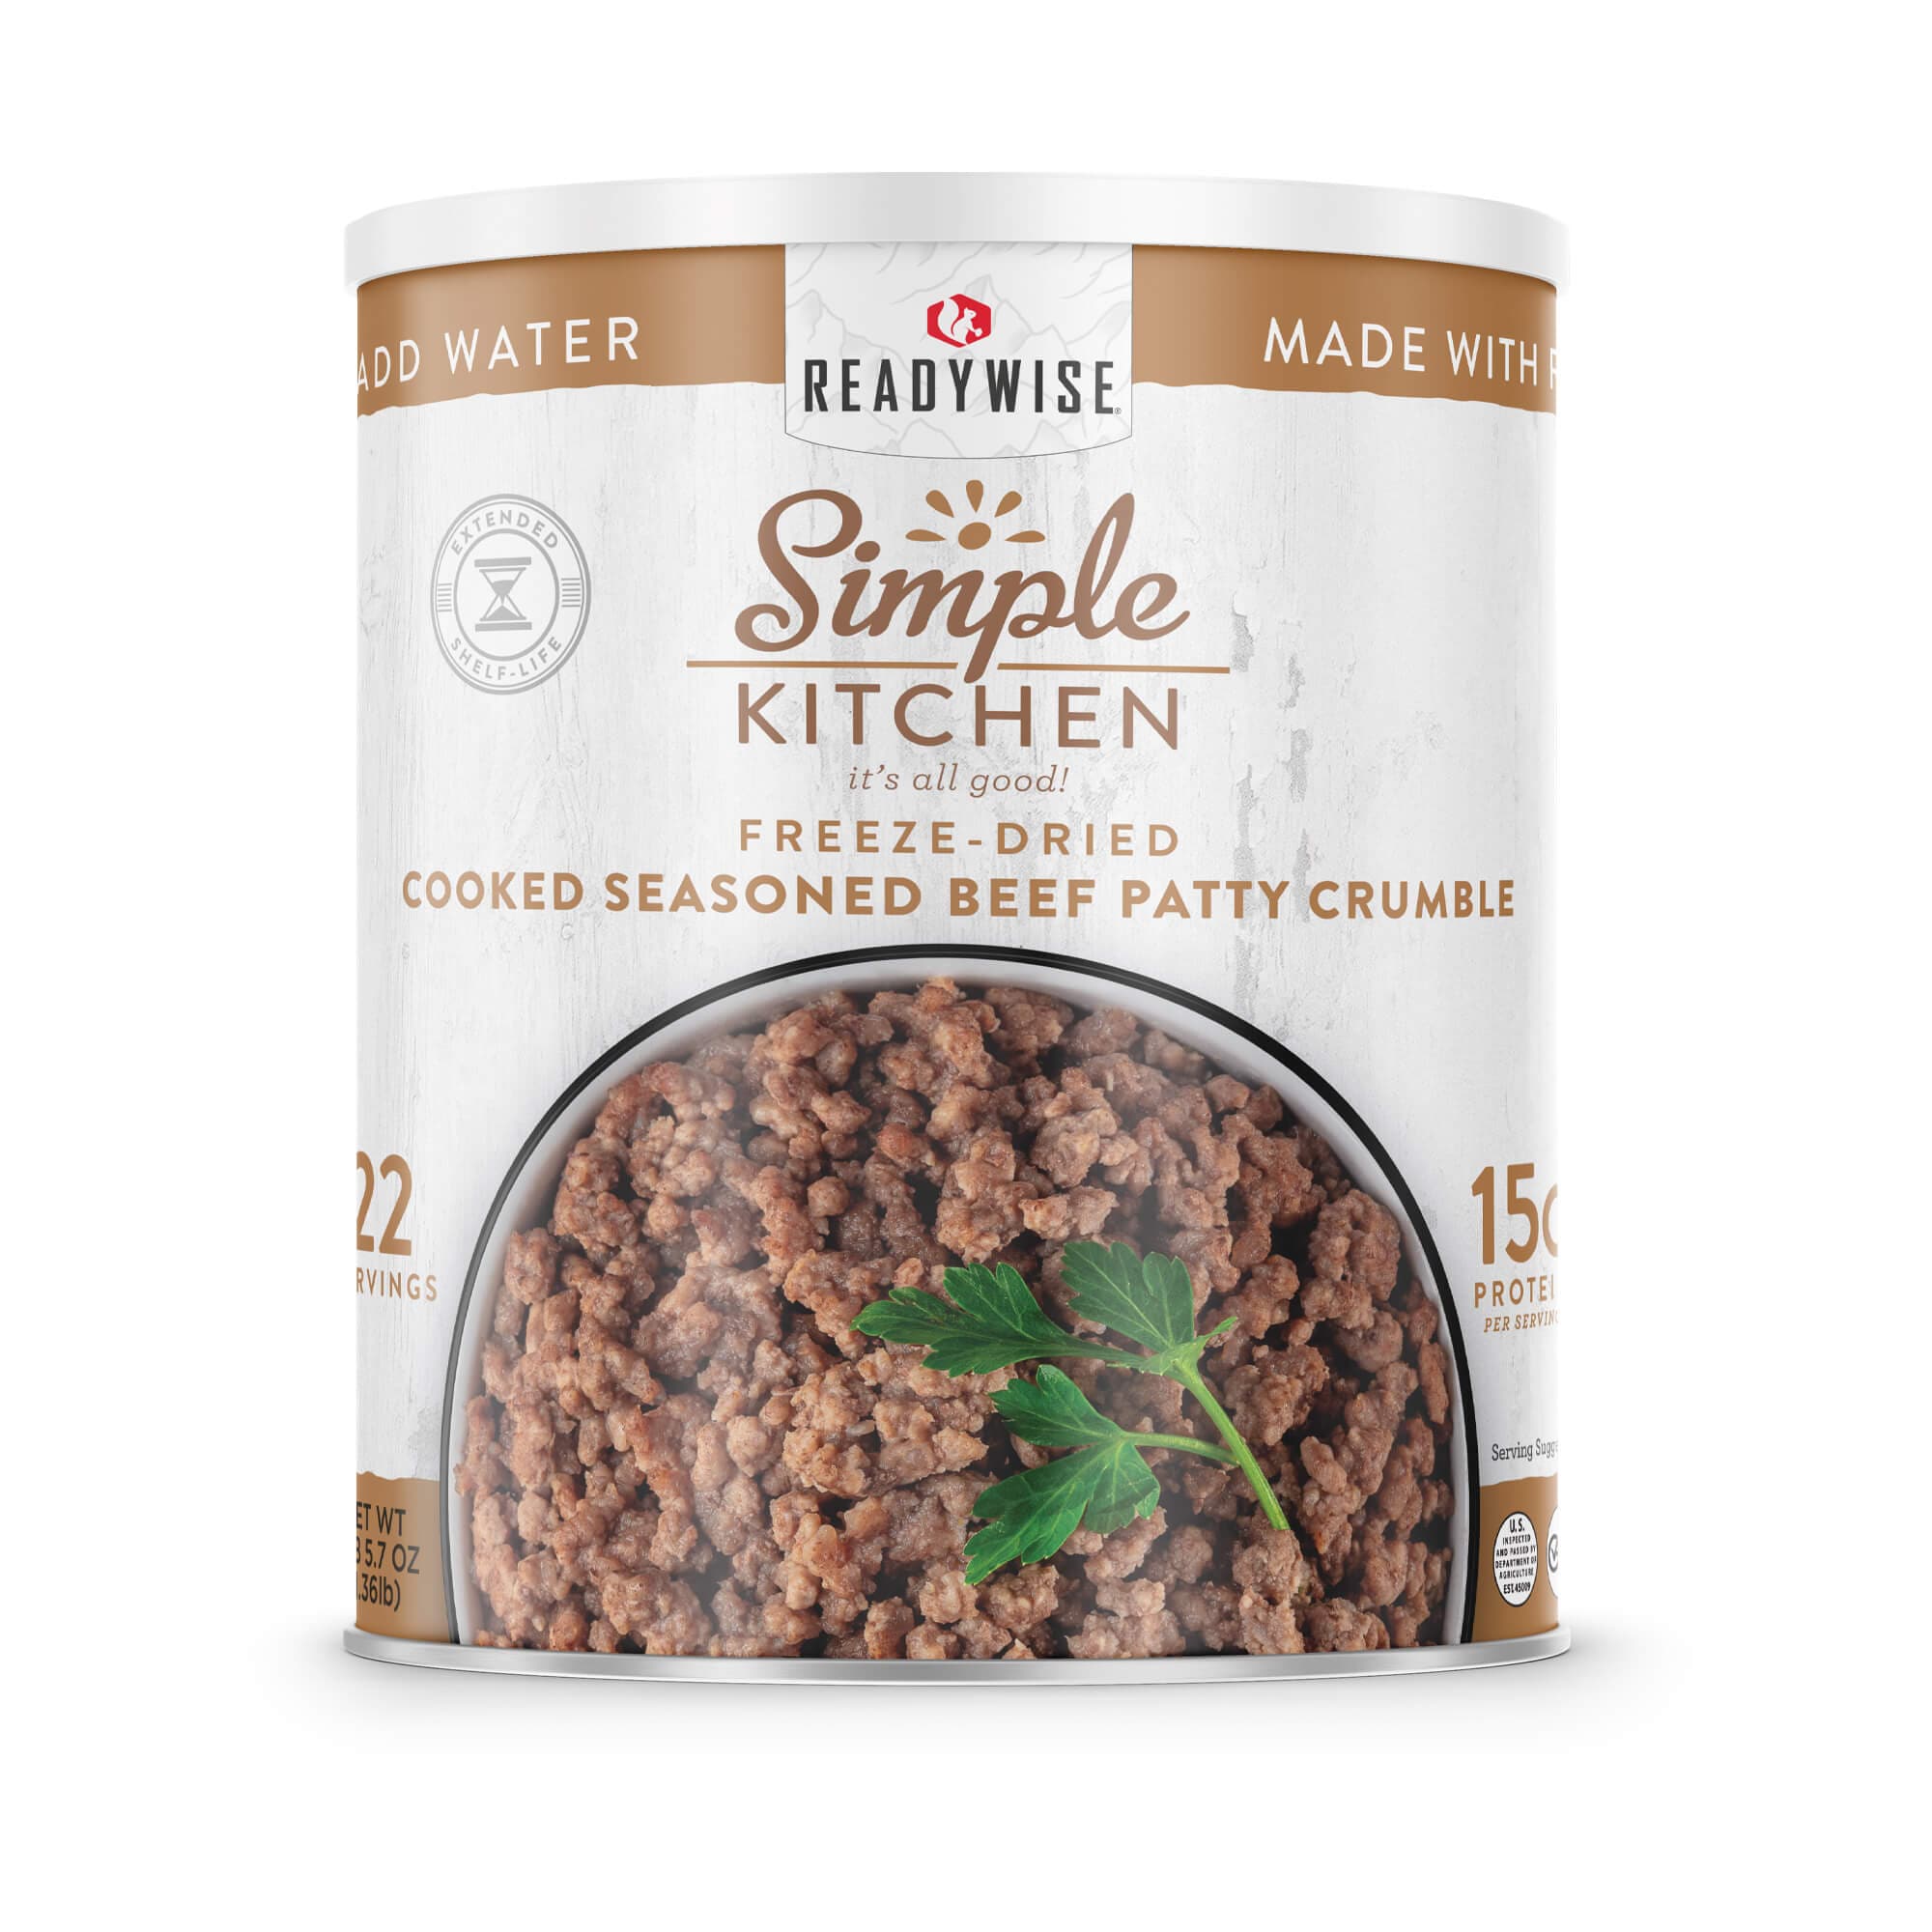 Simple-Kitchen-#10-can-freeze-dried-beef-crumbles